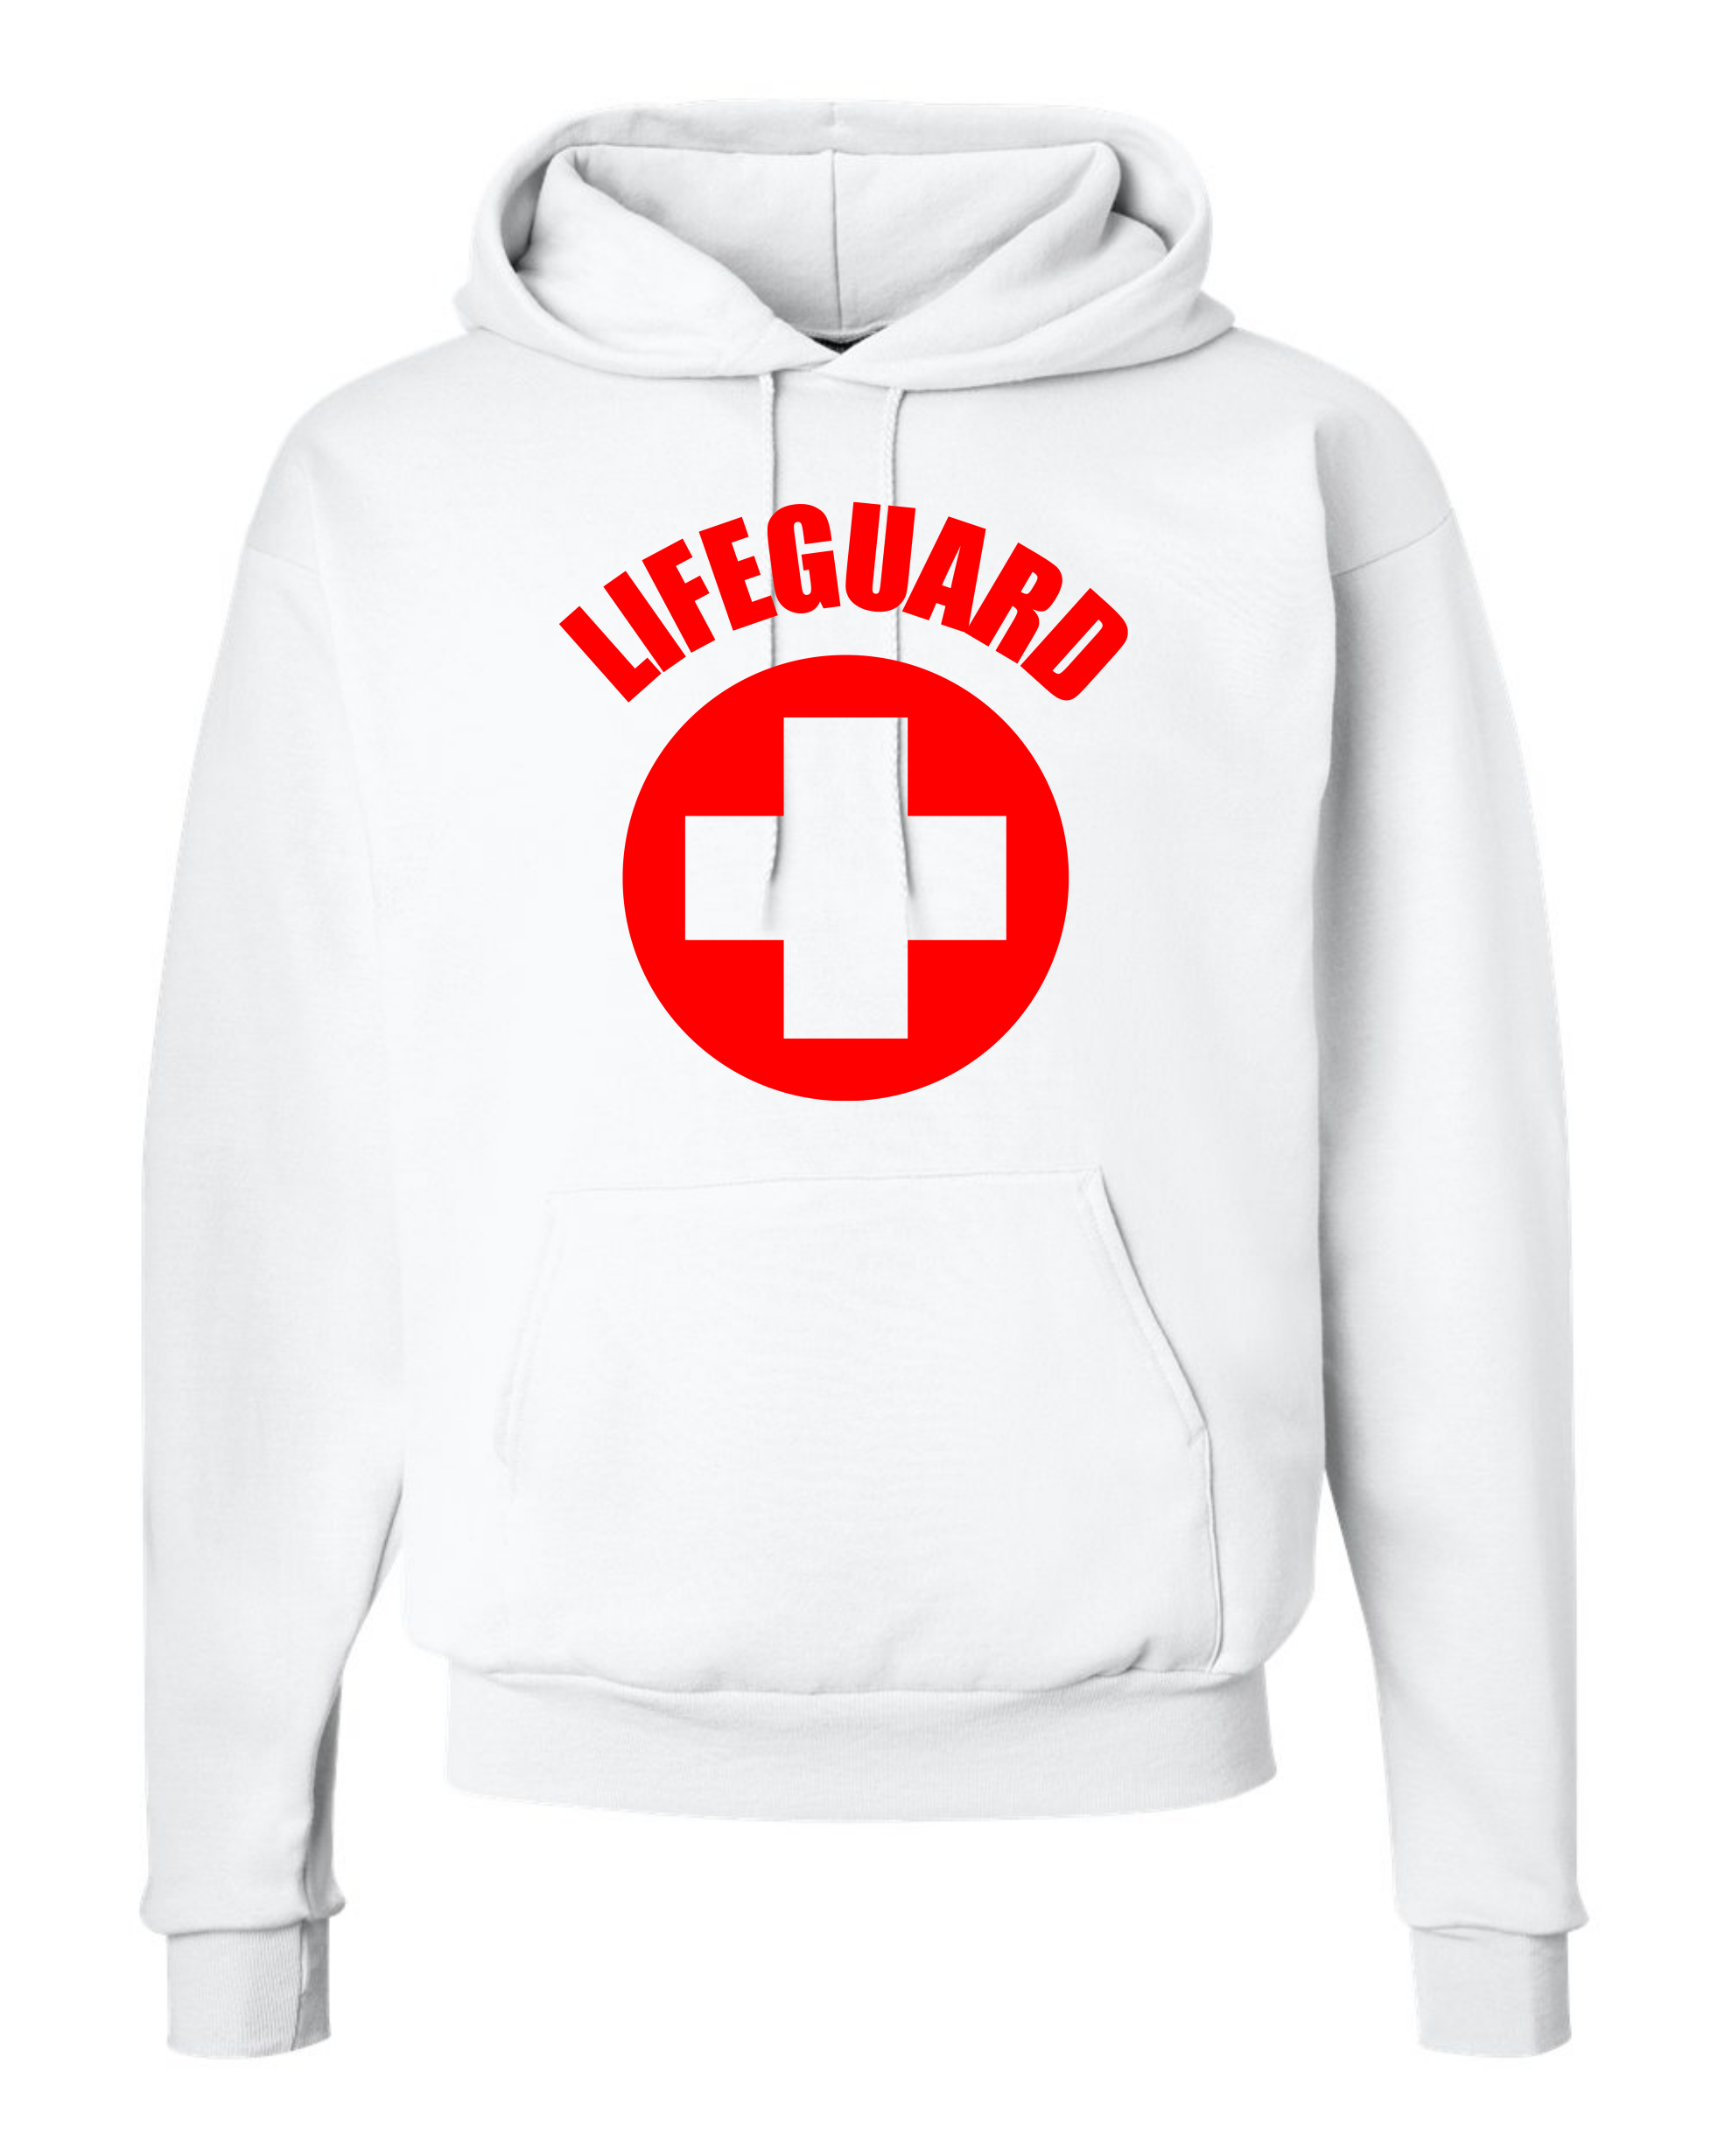 Lifeguard – Hoodie Sweatshirt (Round Logo) - Unique Country Store & More